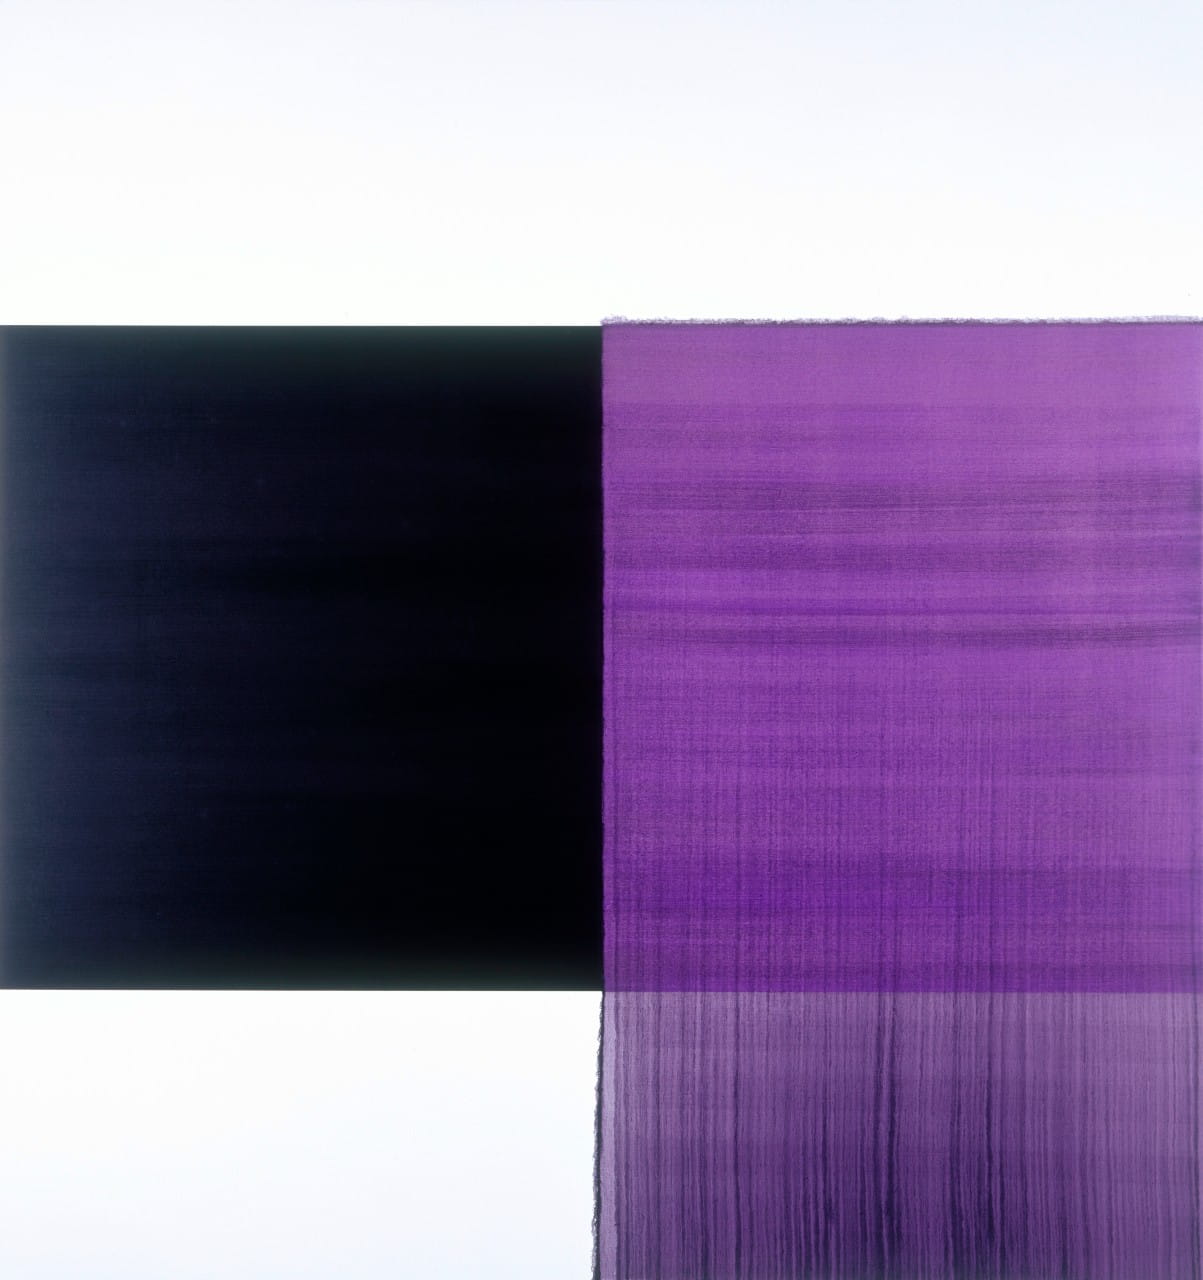 Oil painting with a solid black square in the middle left hand side, next to a more transparent violet square in the middle right. Top of painting is white. Under the black square is white paint. Under the violet is an even more transparent violet rectangle.